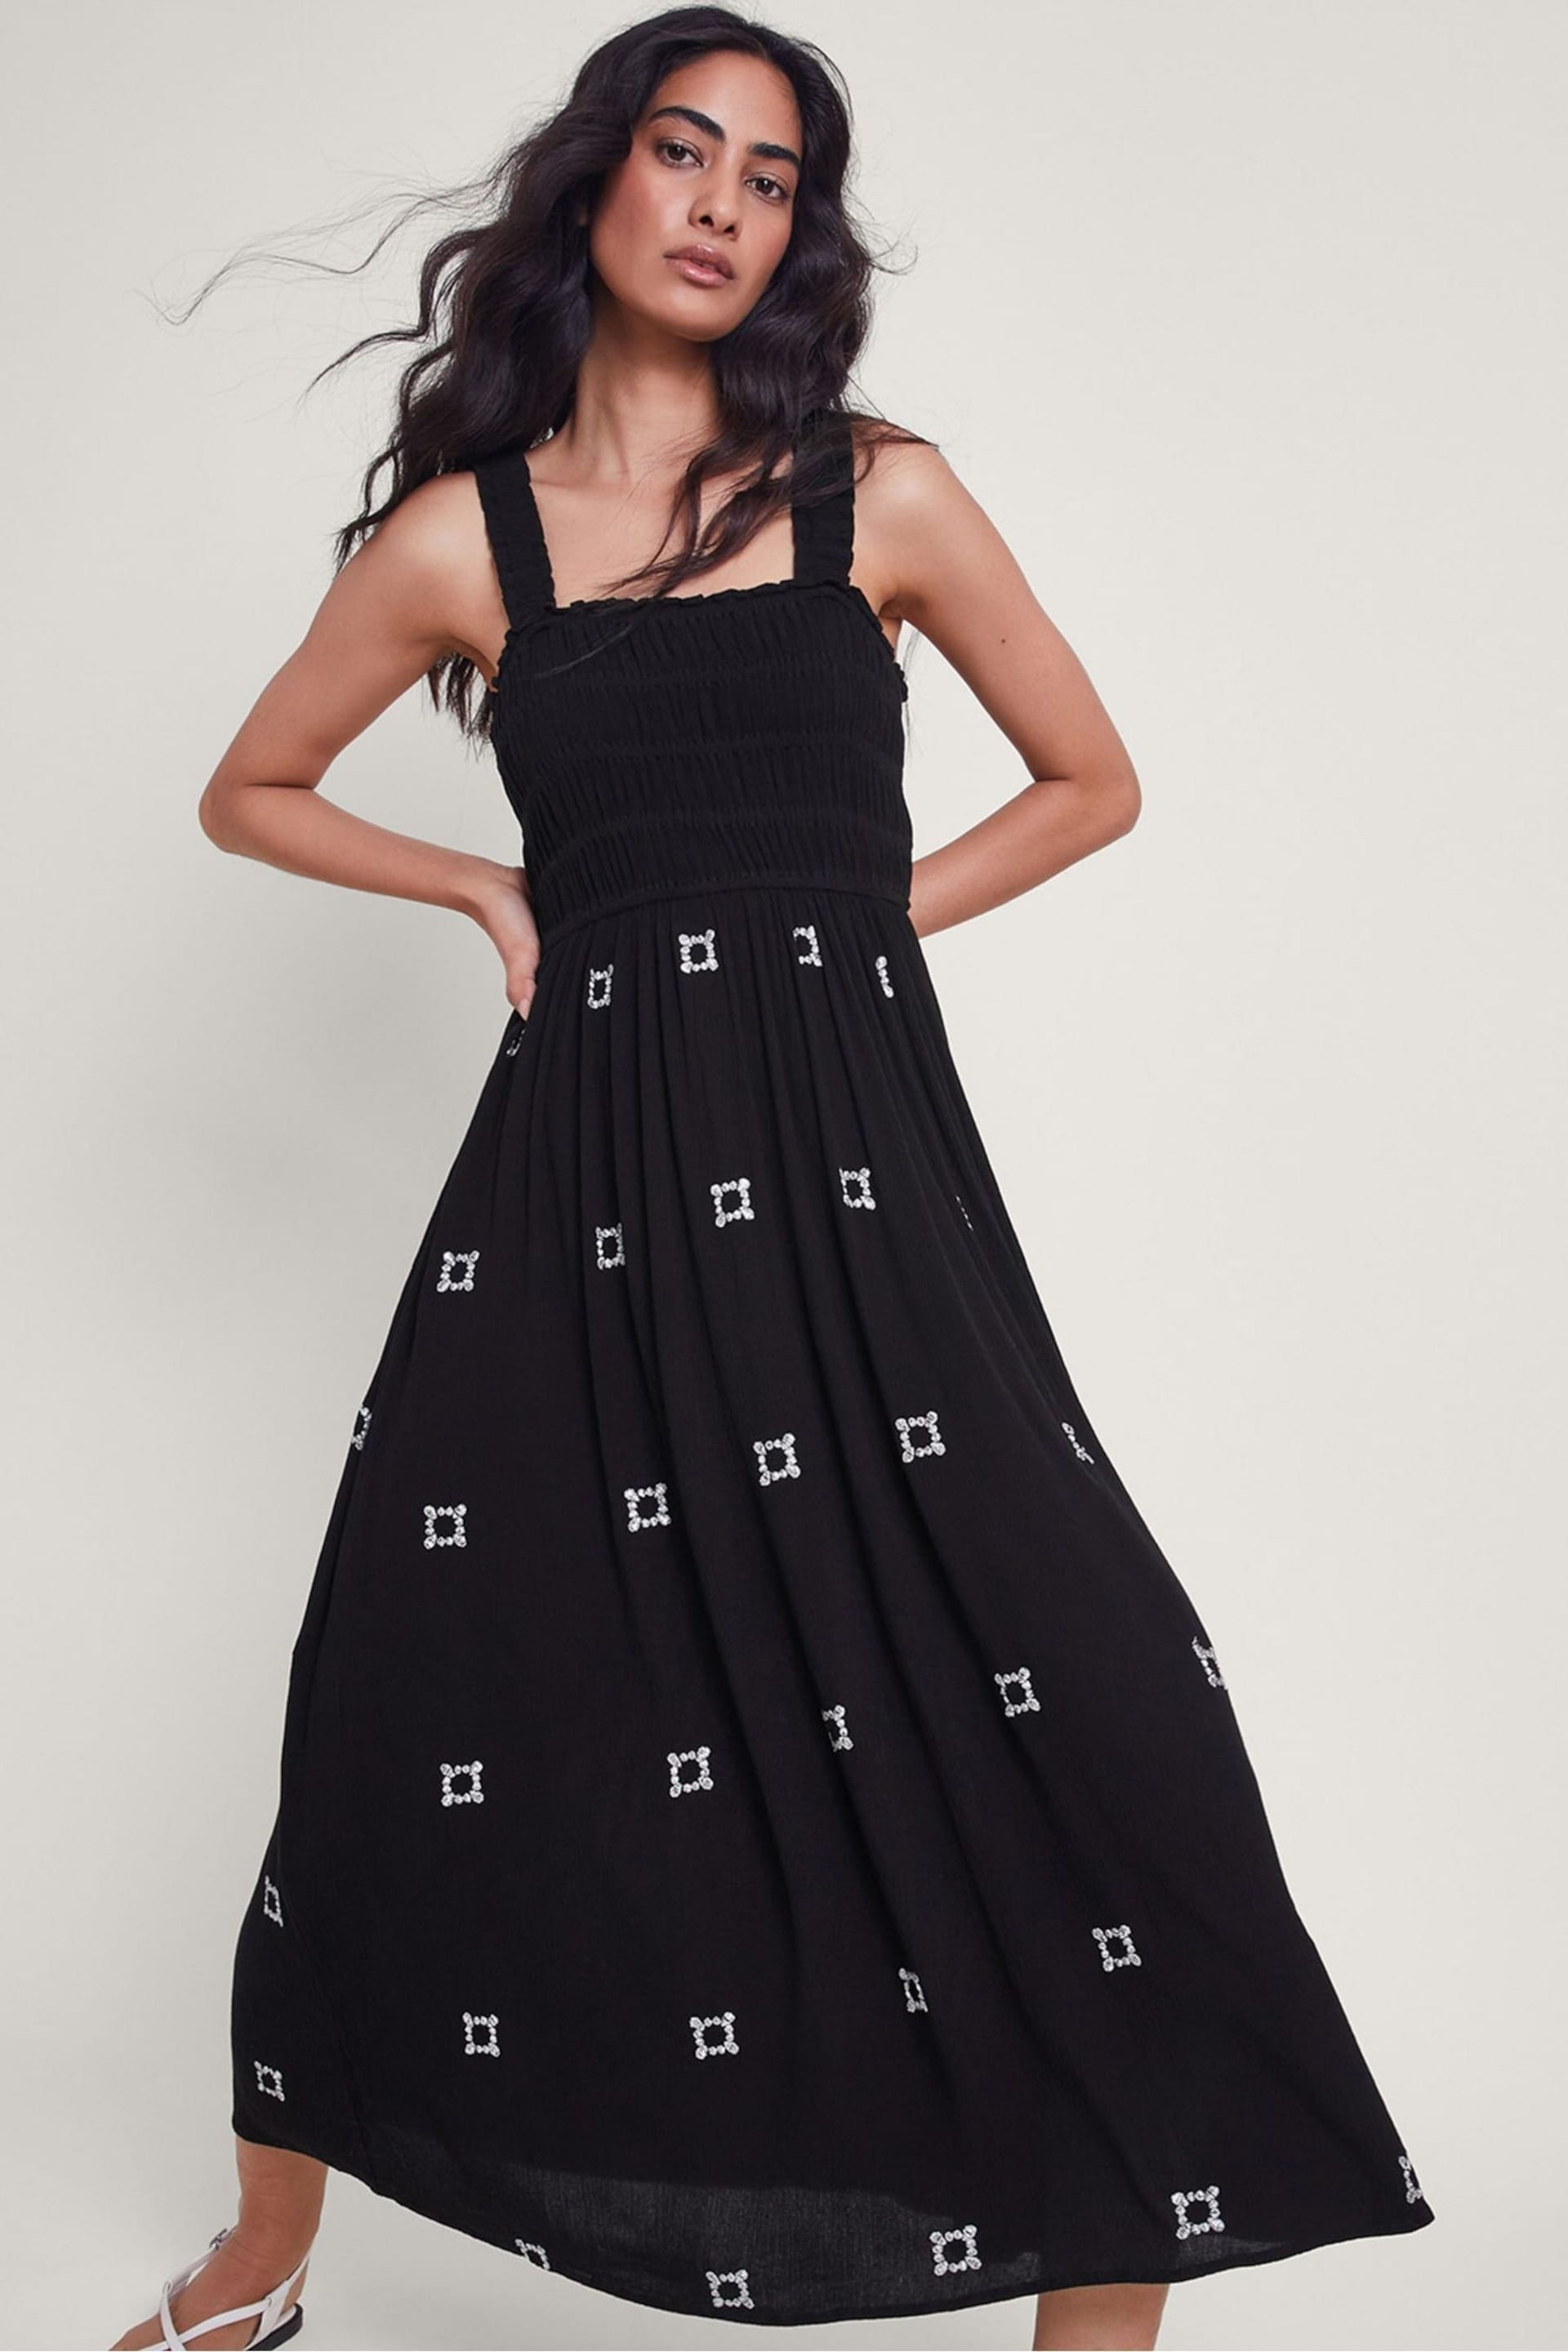 Monsoon Black Briar Embroidered Dress - Image 5 of 5